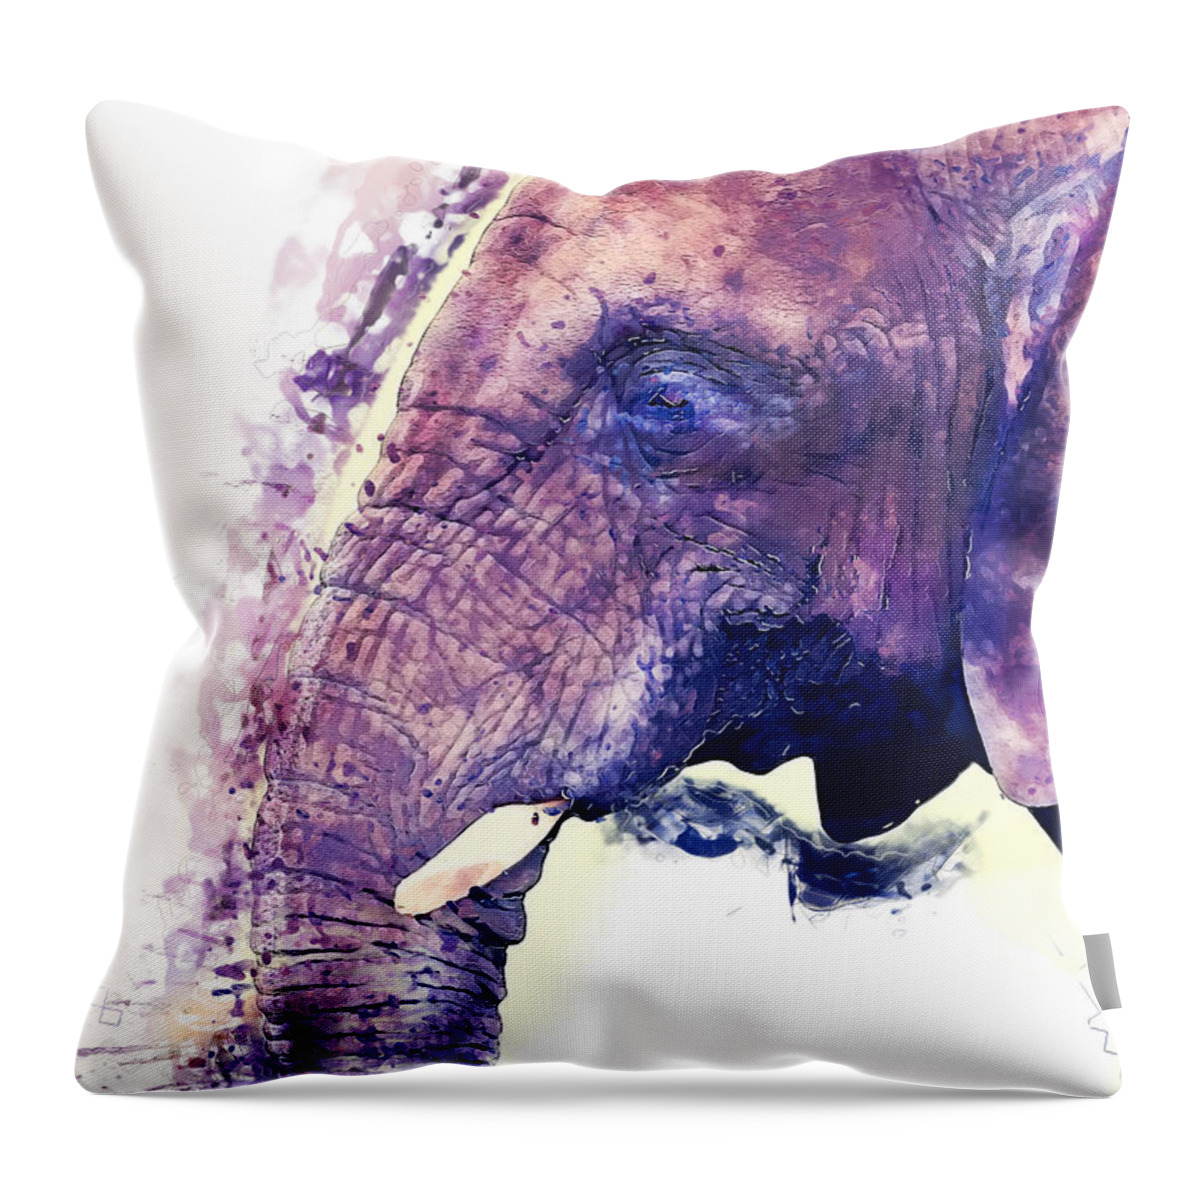 Elephant Throw Pillow featuring the painting Elephant watercolor painting by Justyna Jaszke JBJart